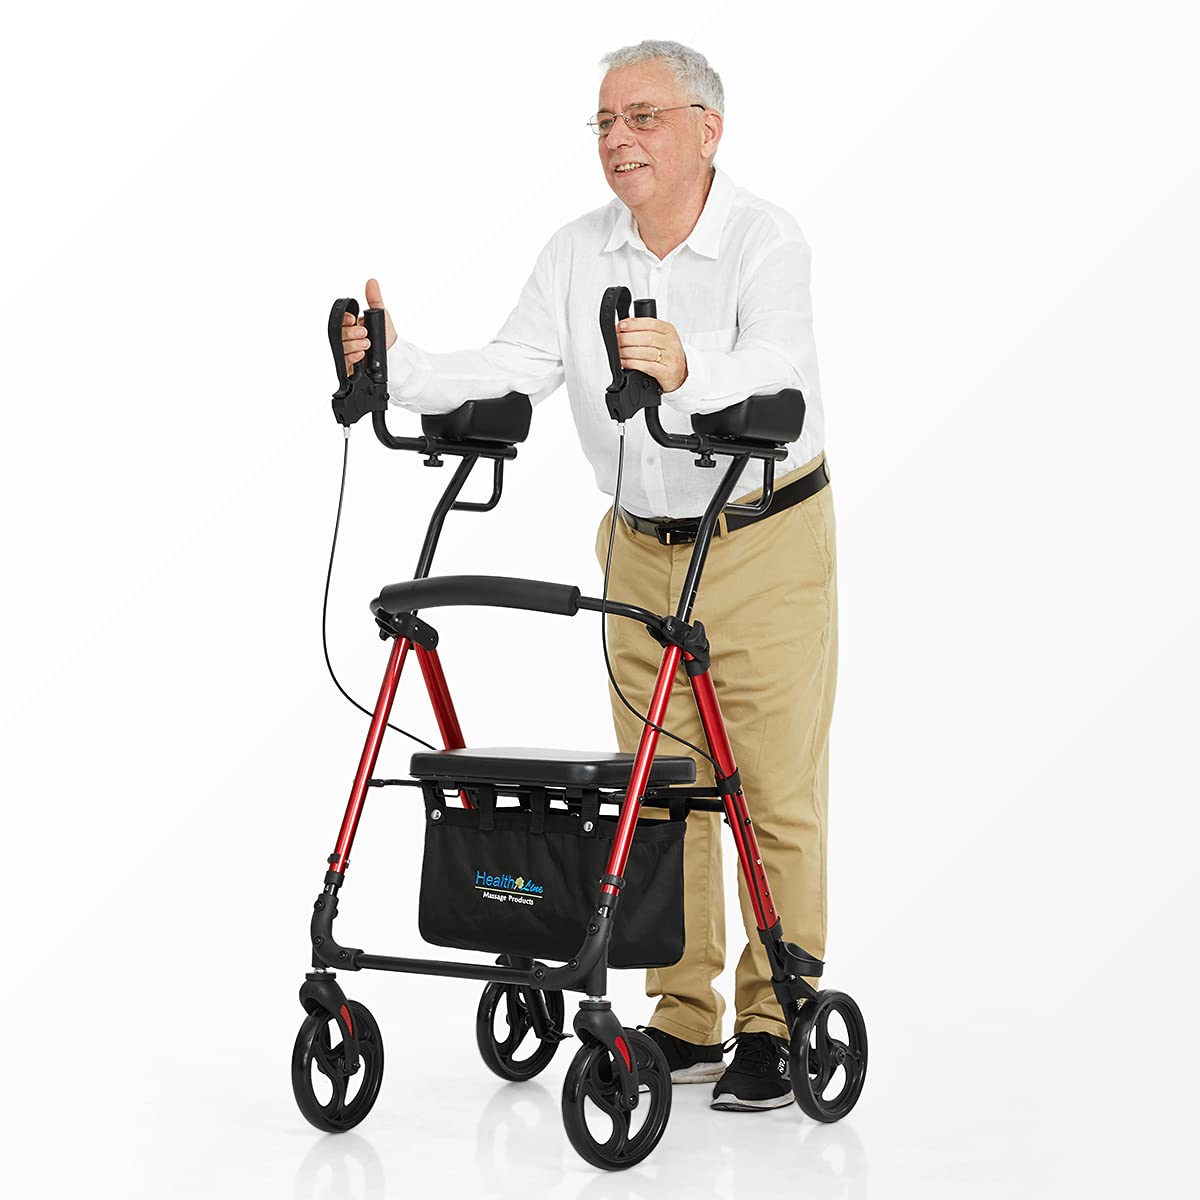 Health Line Massage Products Up Rollator Walker, Up Rollator with Armrest，Tall Folding Walker with Wheels,Up Rollator with Armrest and Seat Rolling Walker for Seniors and Adults, Red